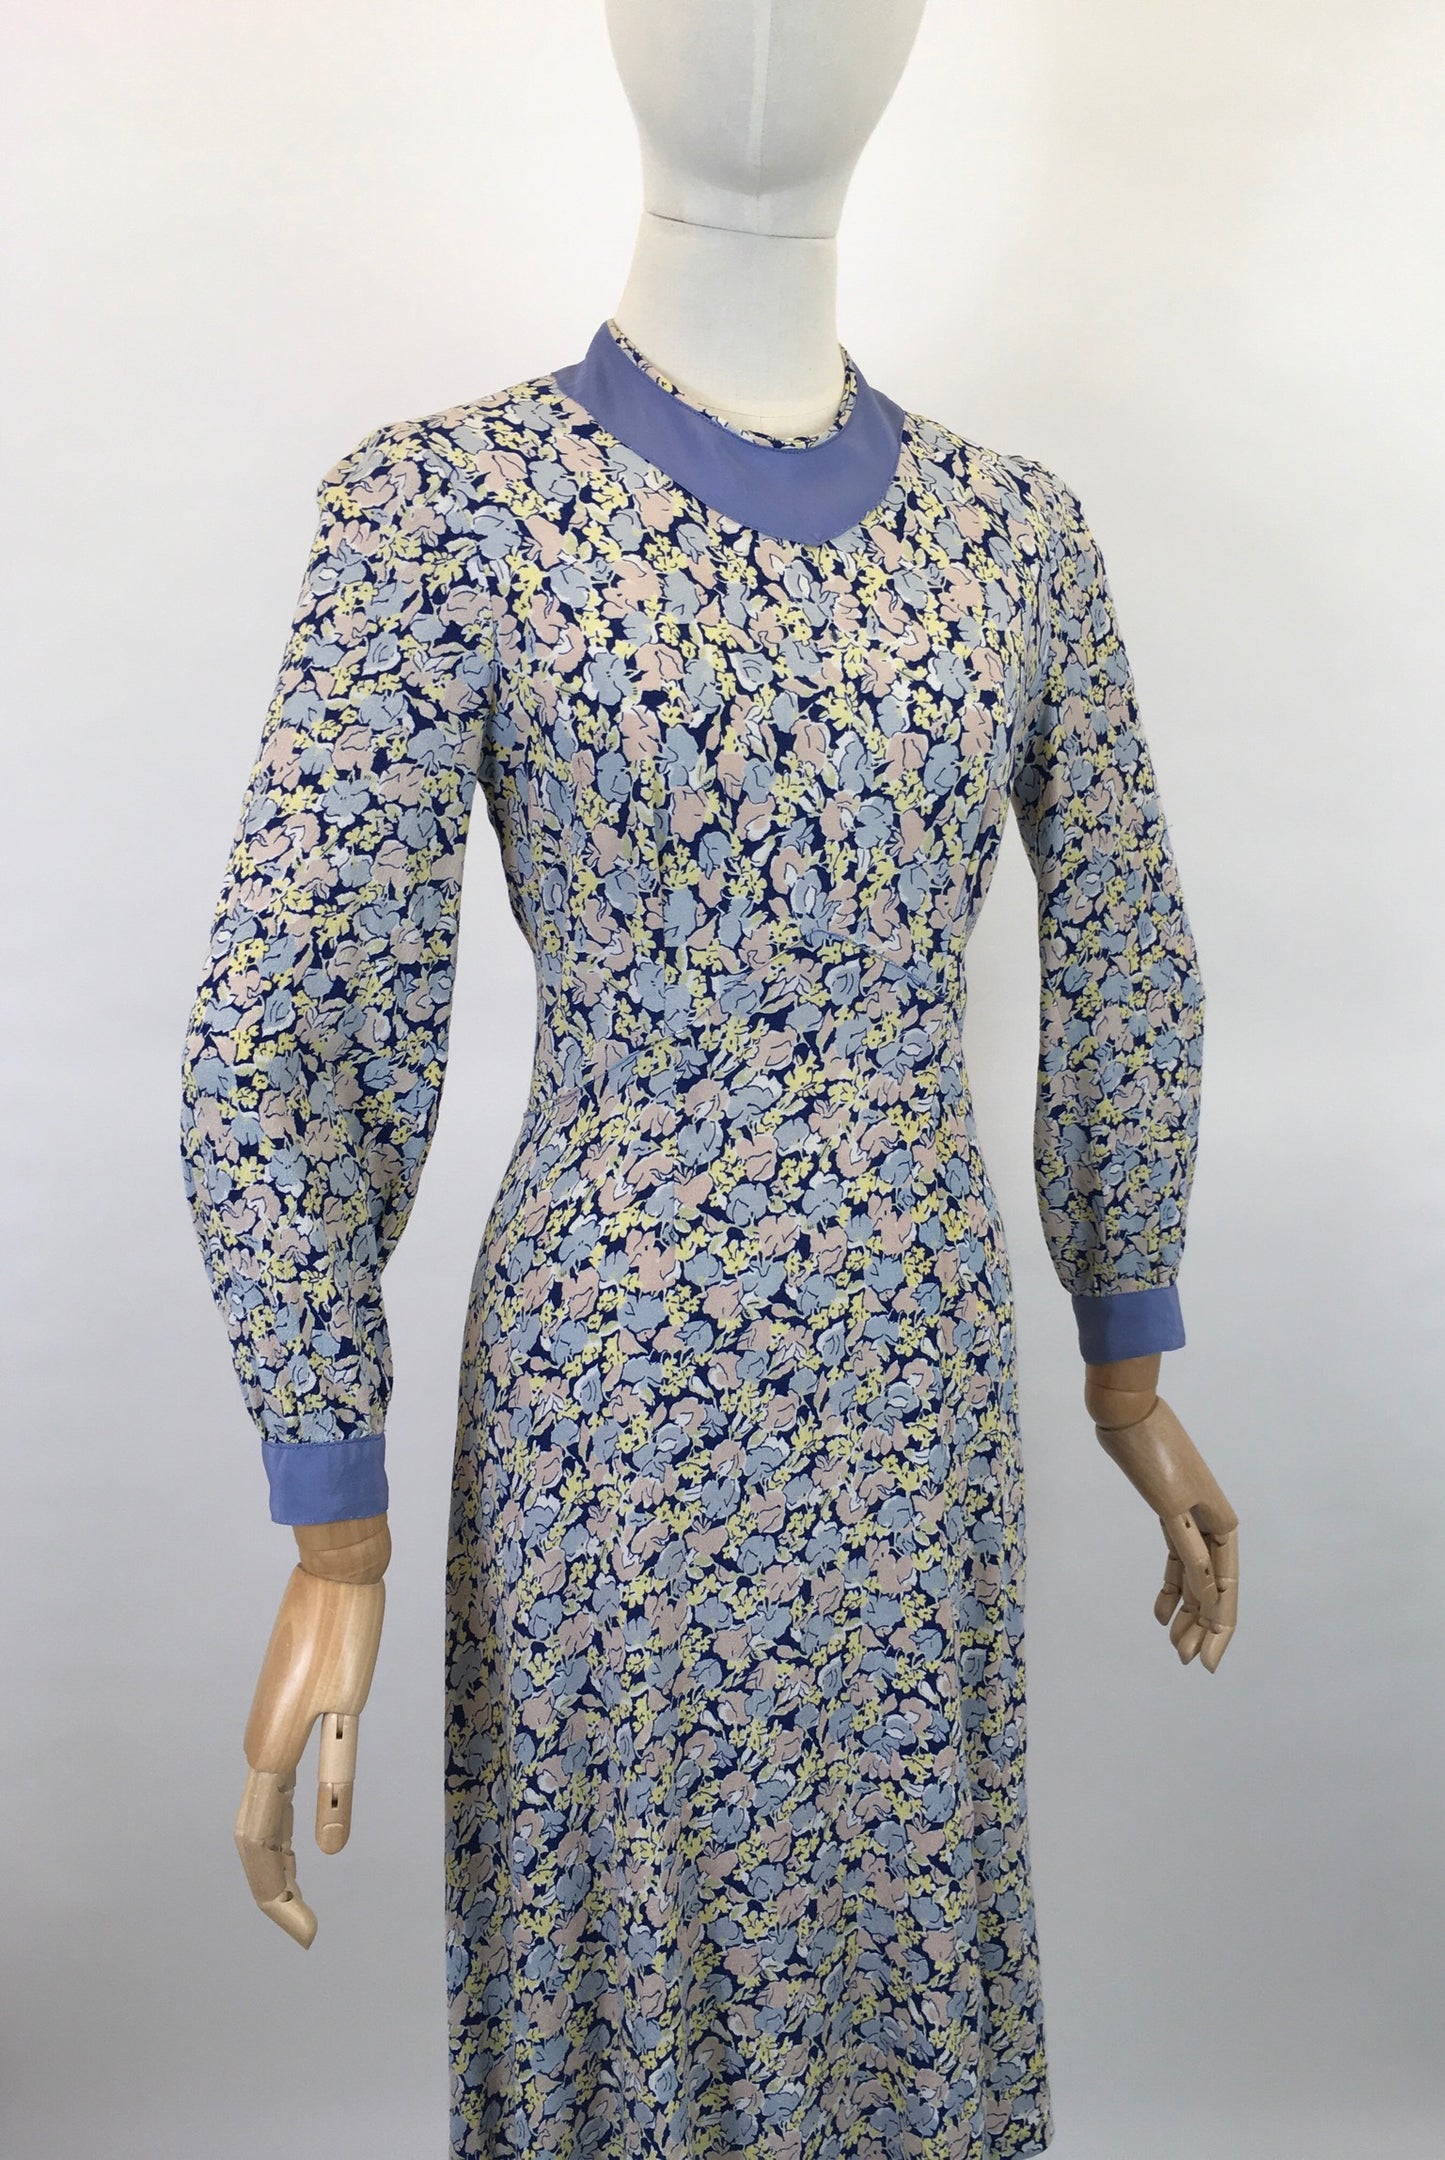 Original 1930’s Crepe Floral Day Dress - In A Pallet of Soft Pastels : Powdered Blue, Delicate Rose and Buttery Yellow